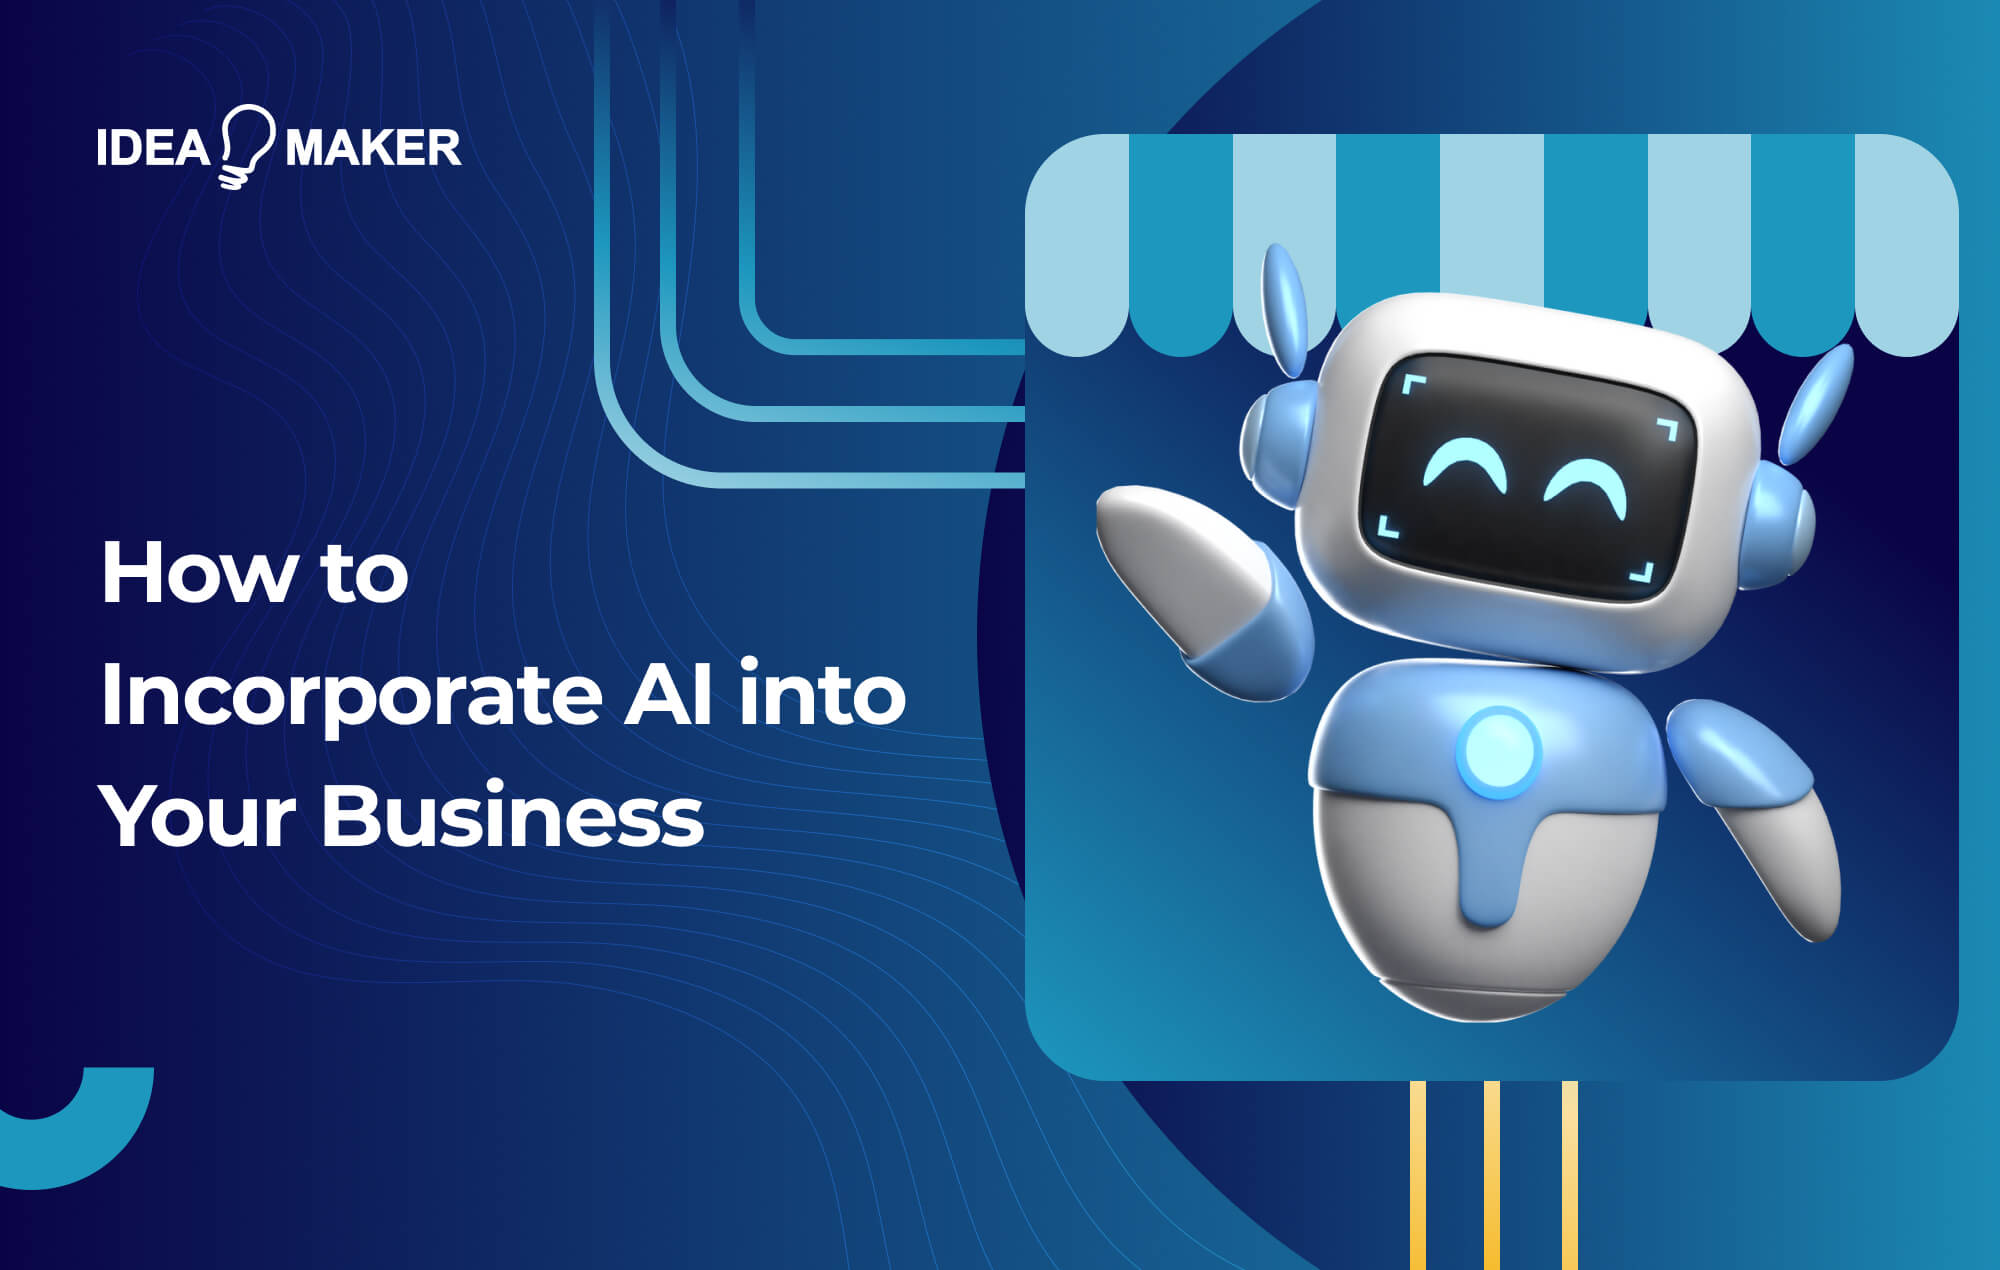 Ideamaker - How to Incorporate AI into Your Business - Thumbnail